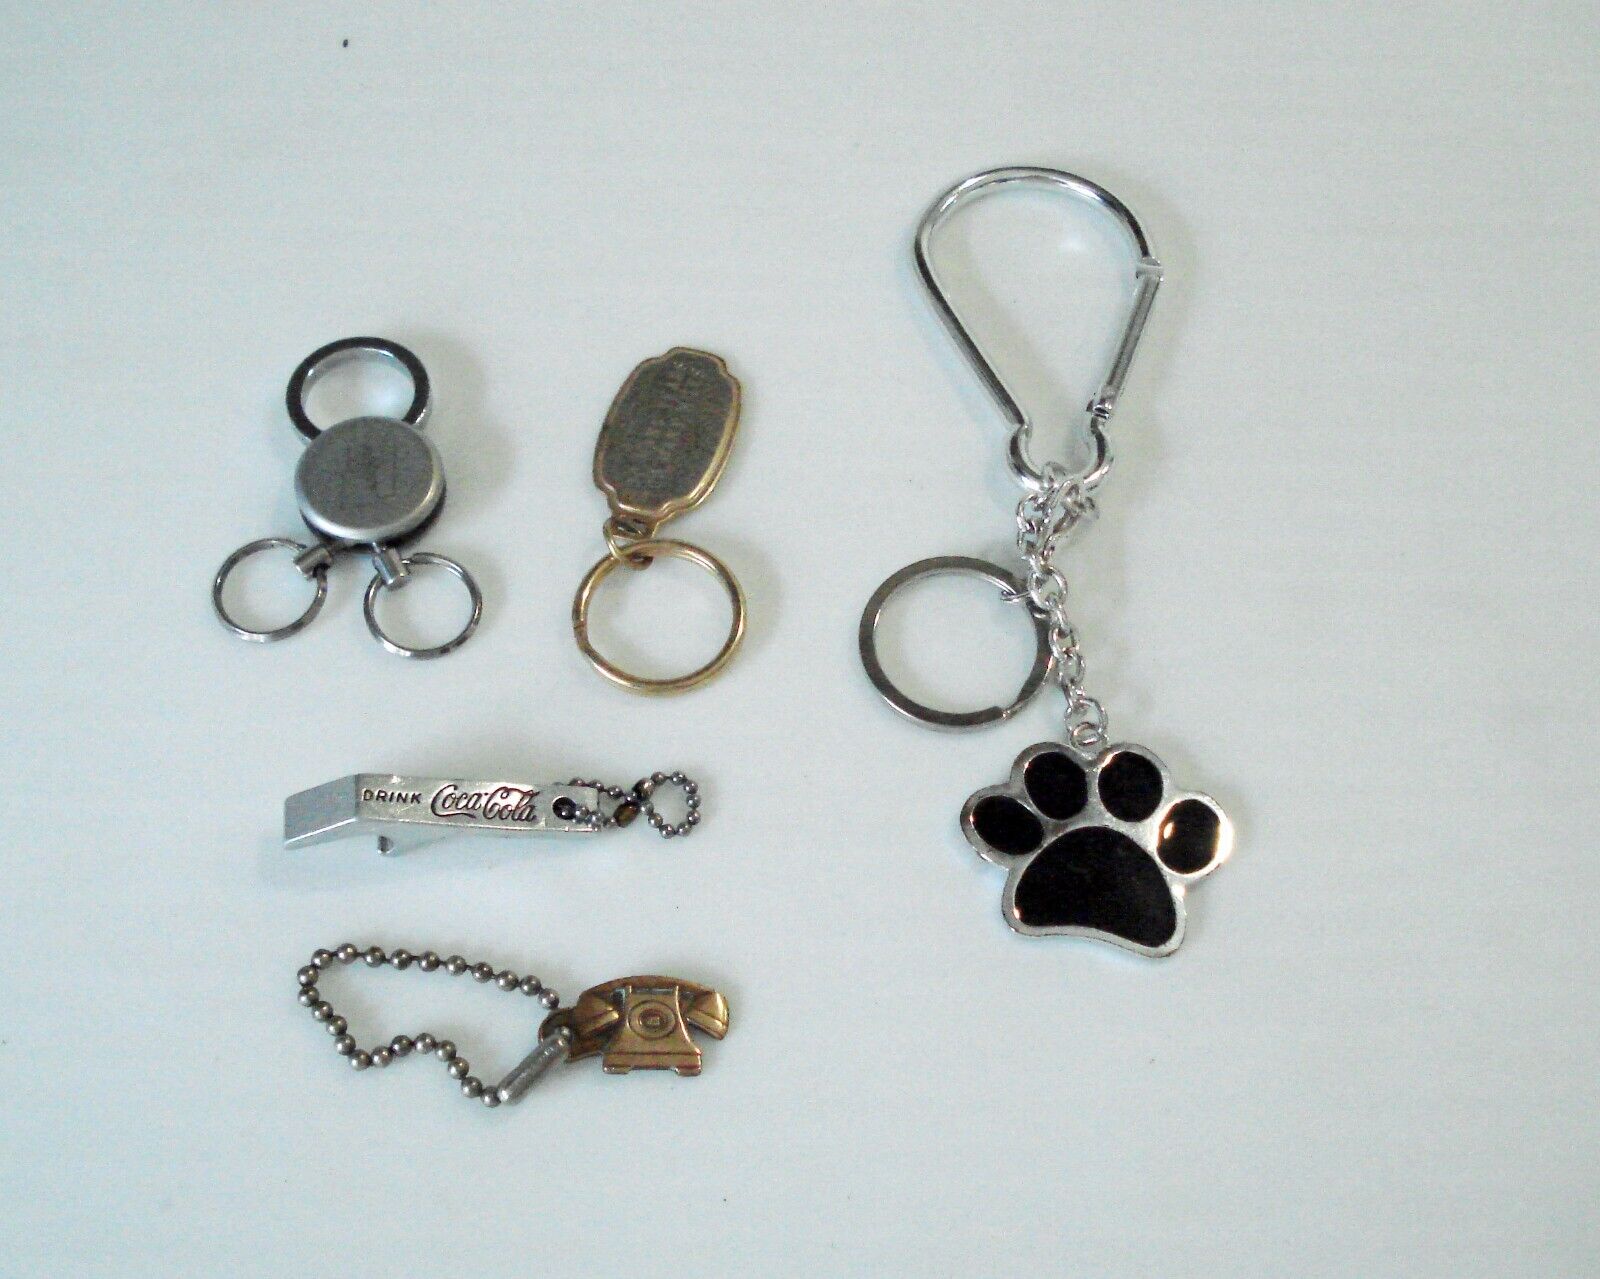 Vintage And Collectible Lot Of Keychains - 5